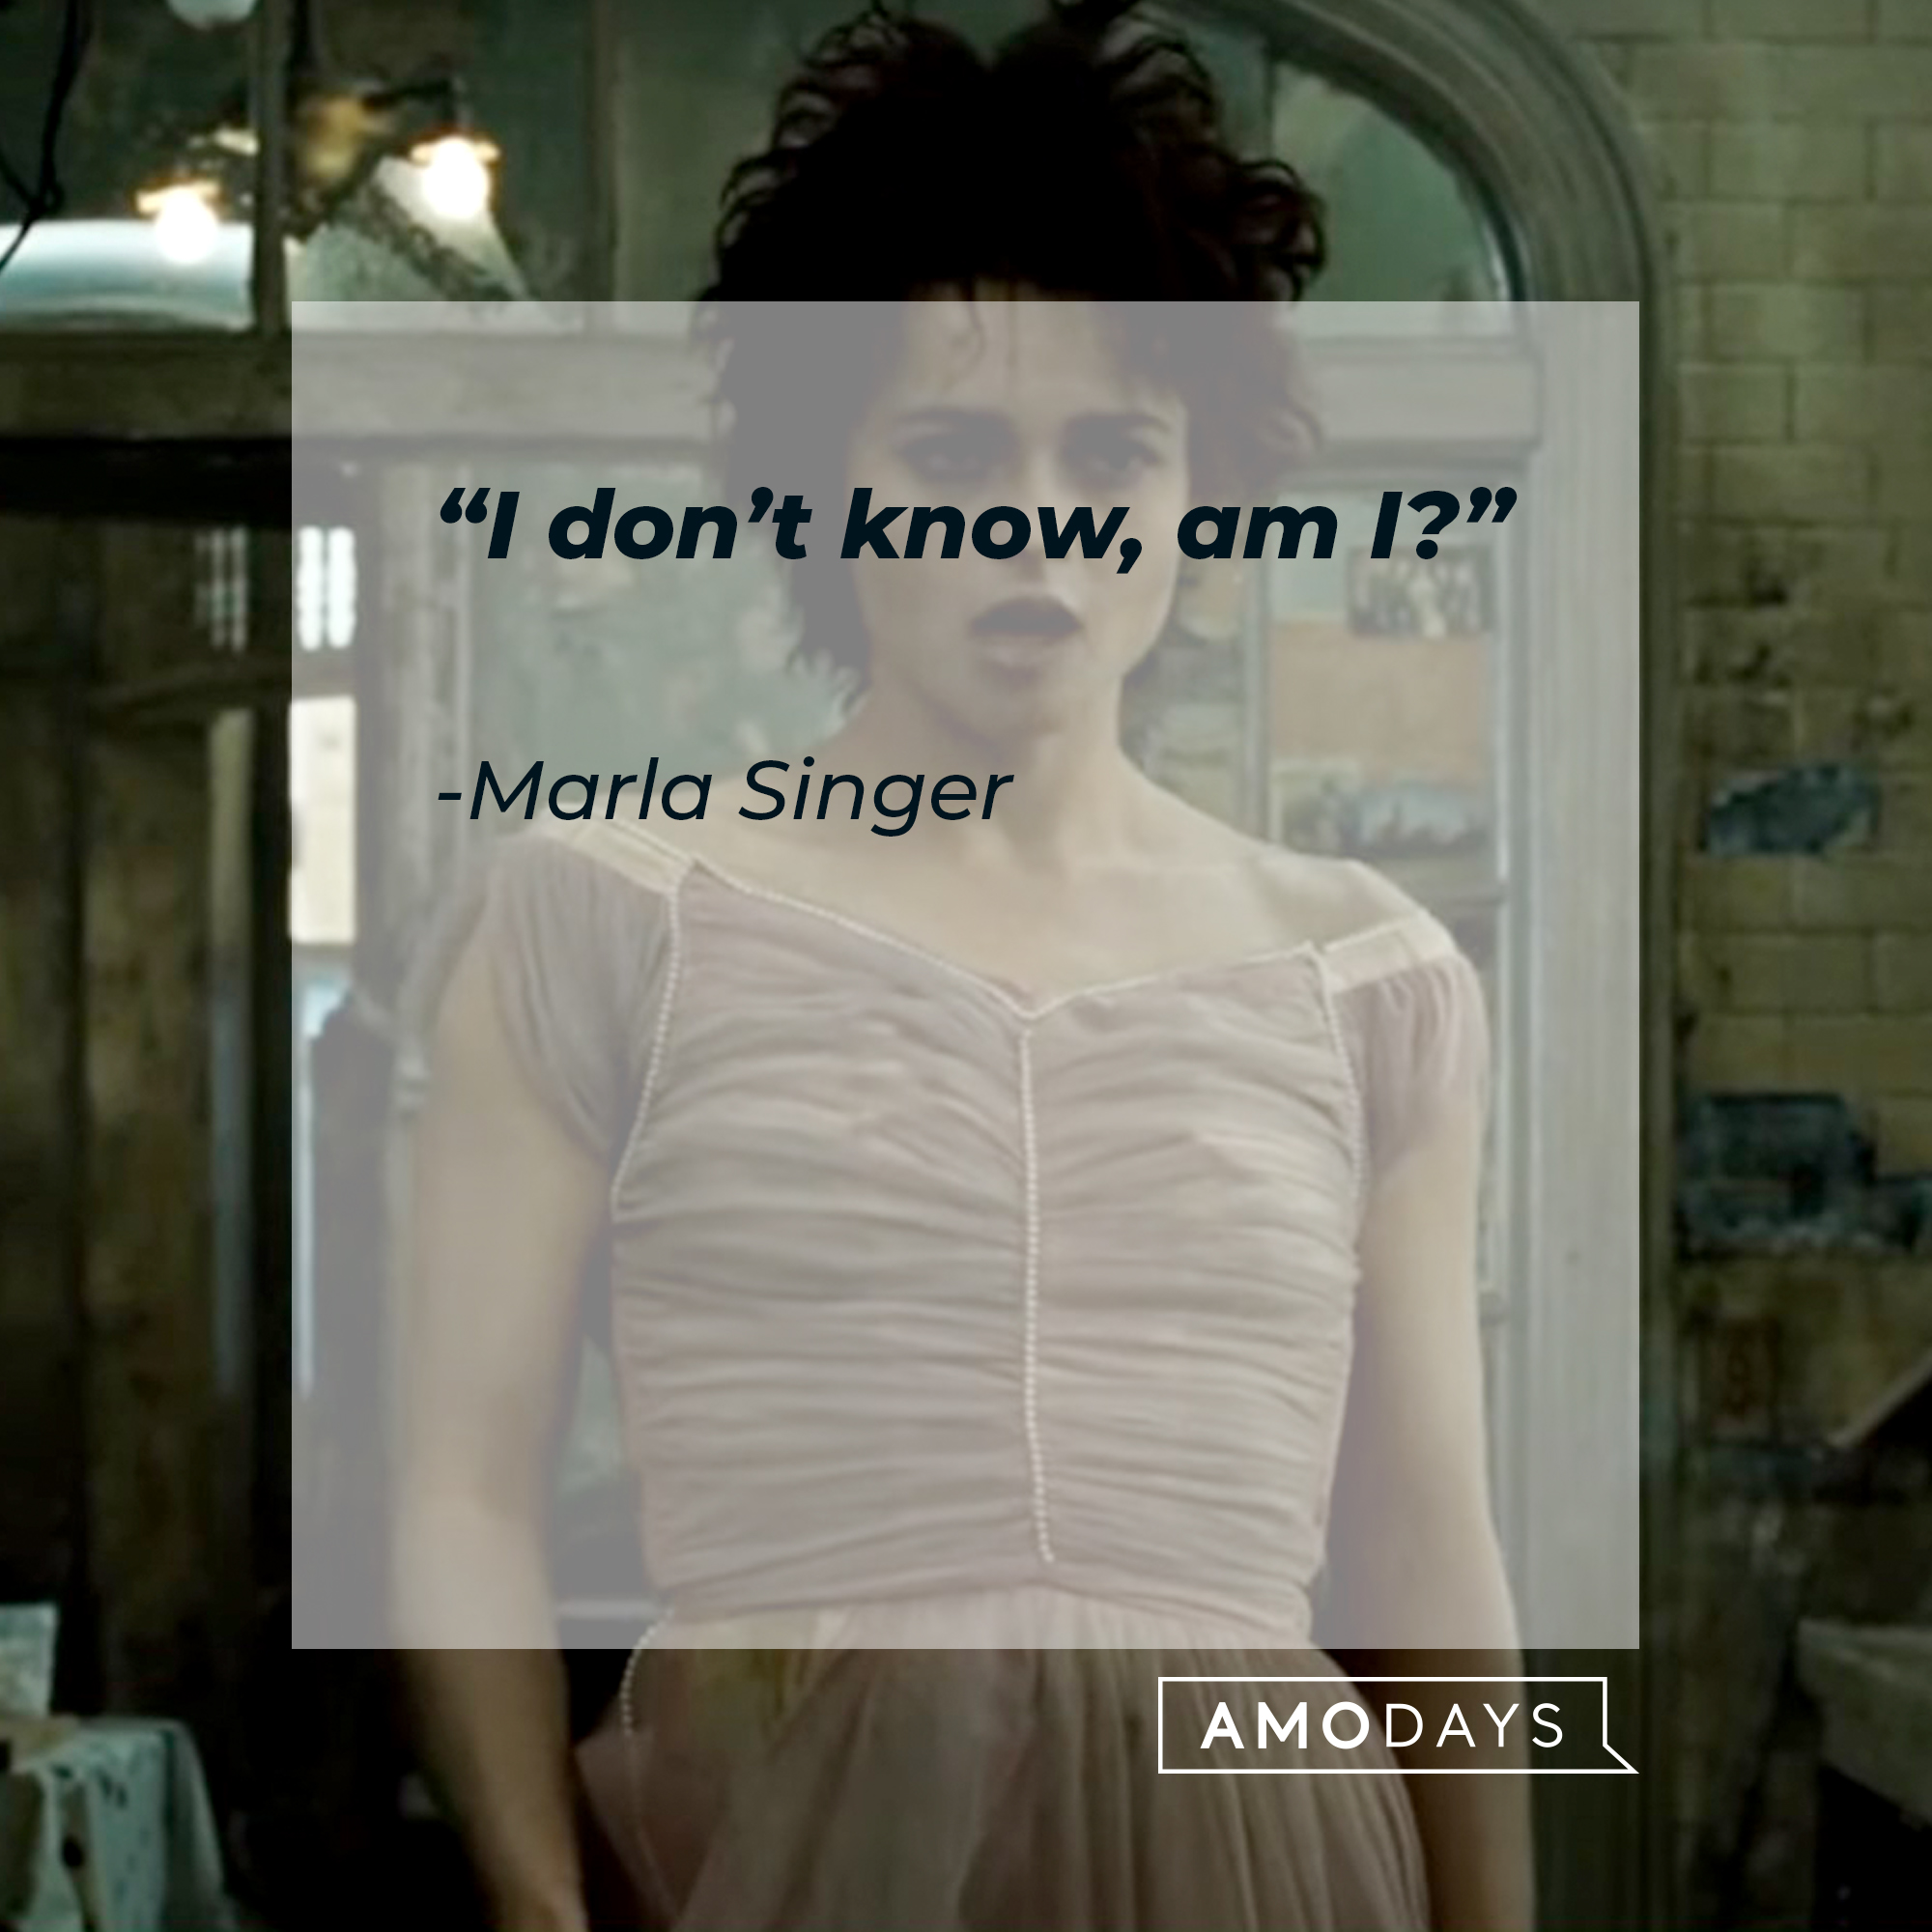 An image of Marla Singer with her quote:“I don’t know, am I?”| Image: facebook.com/FightClub